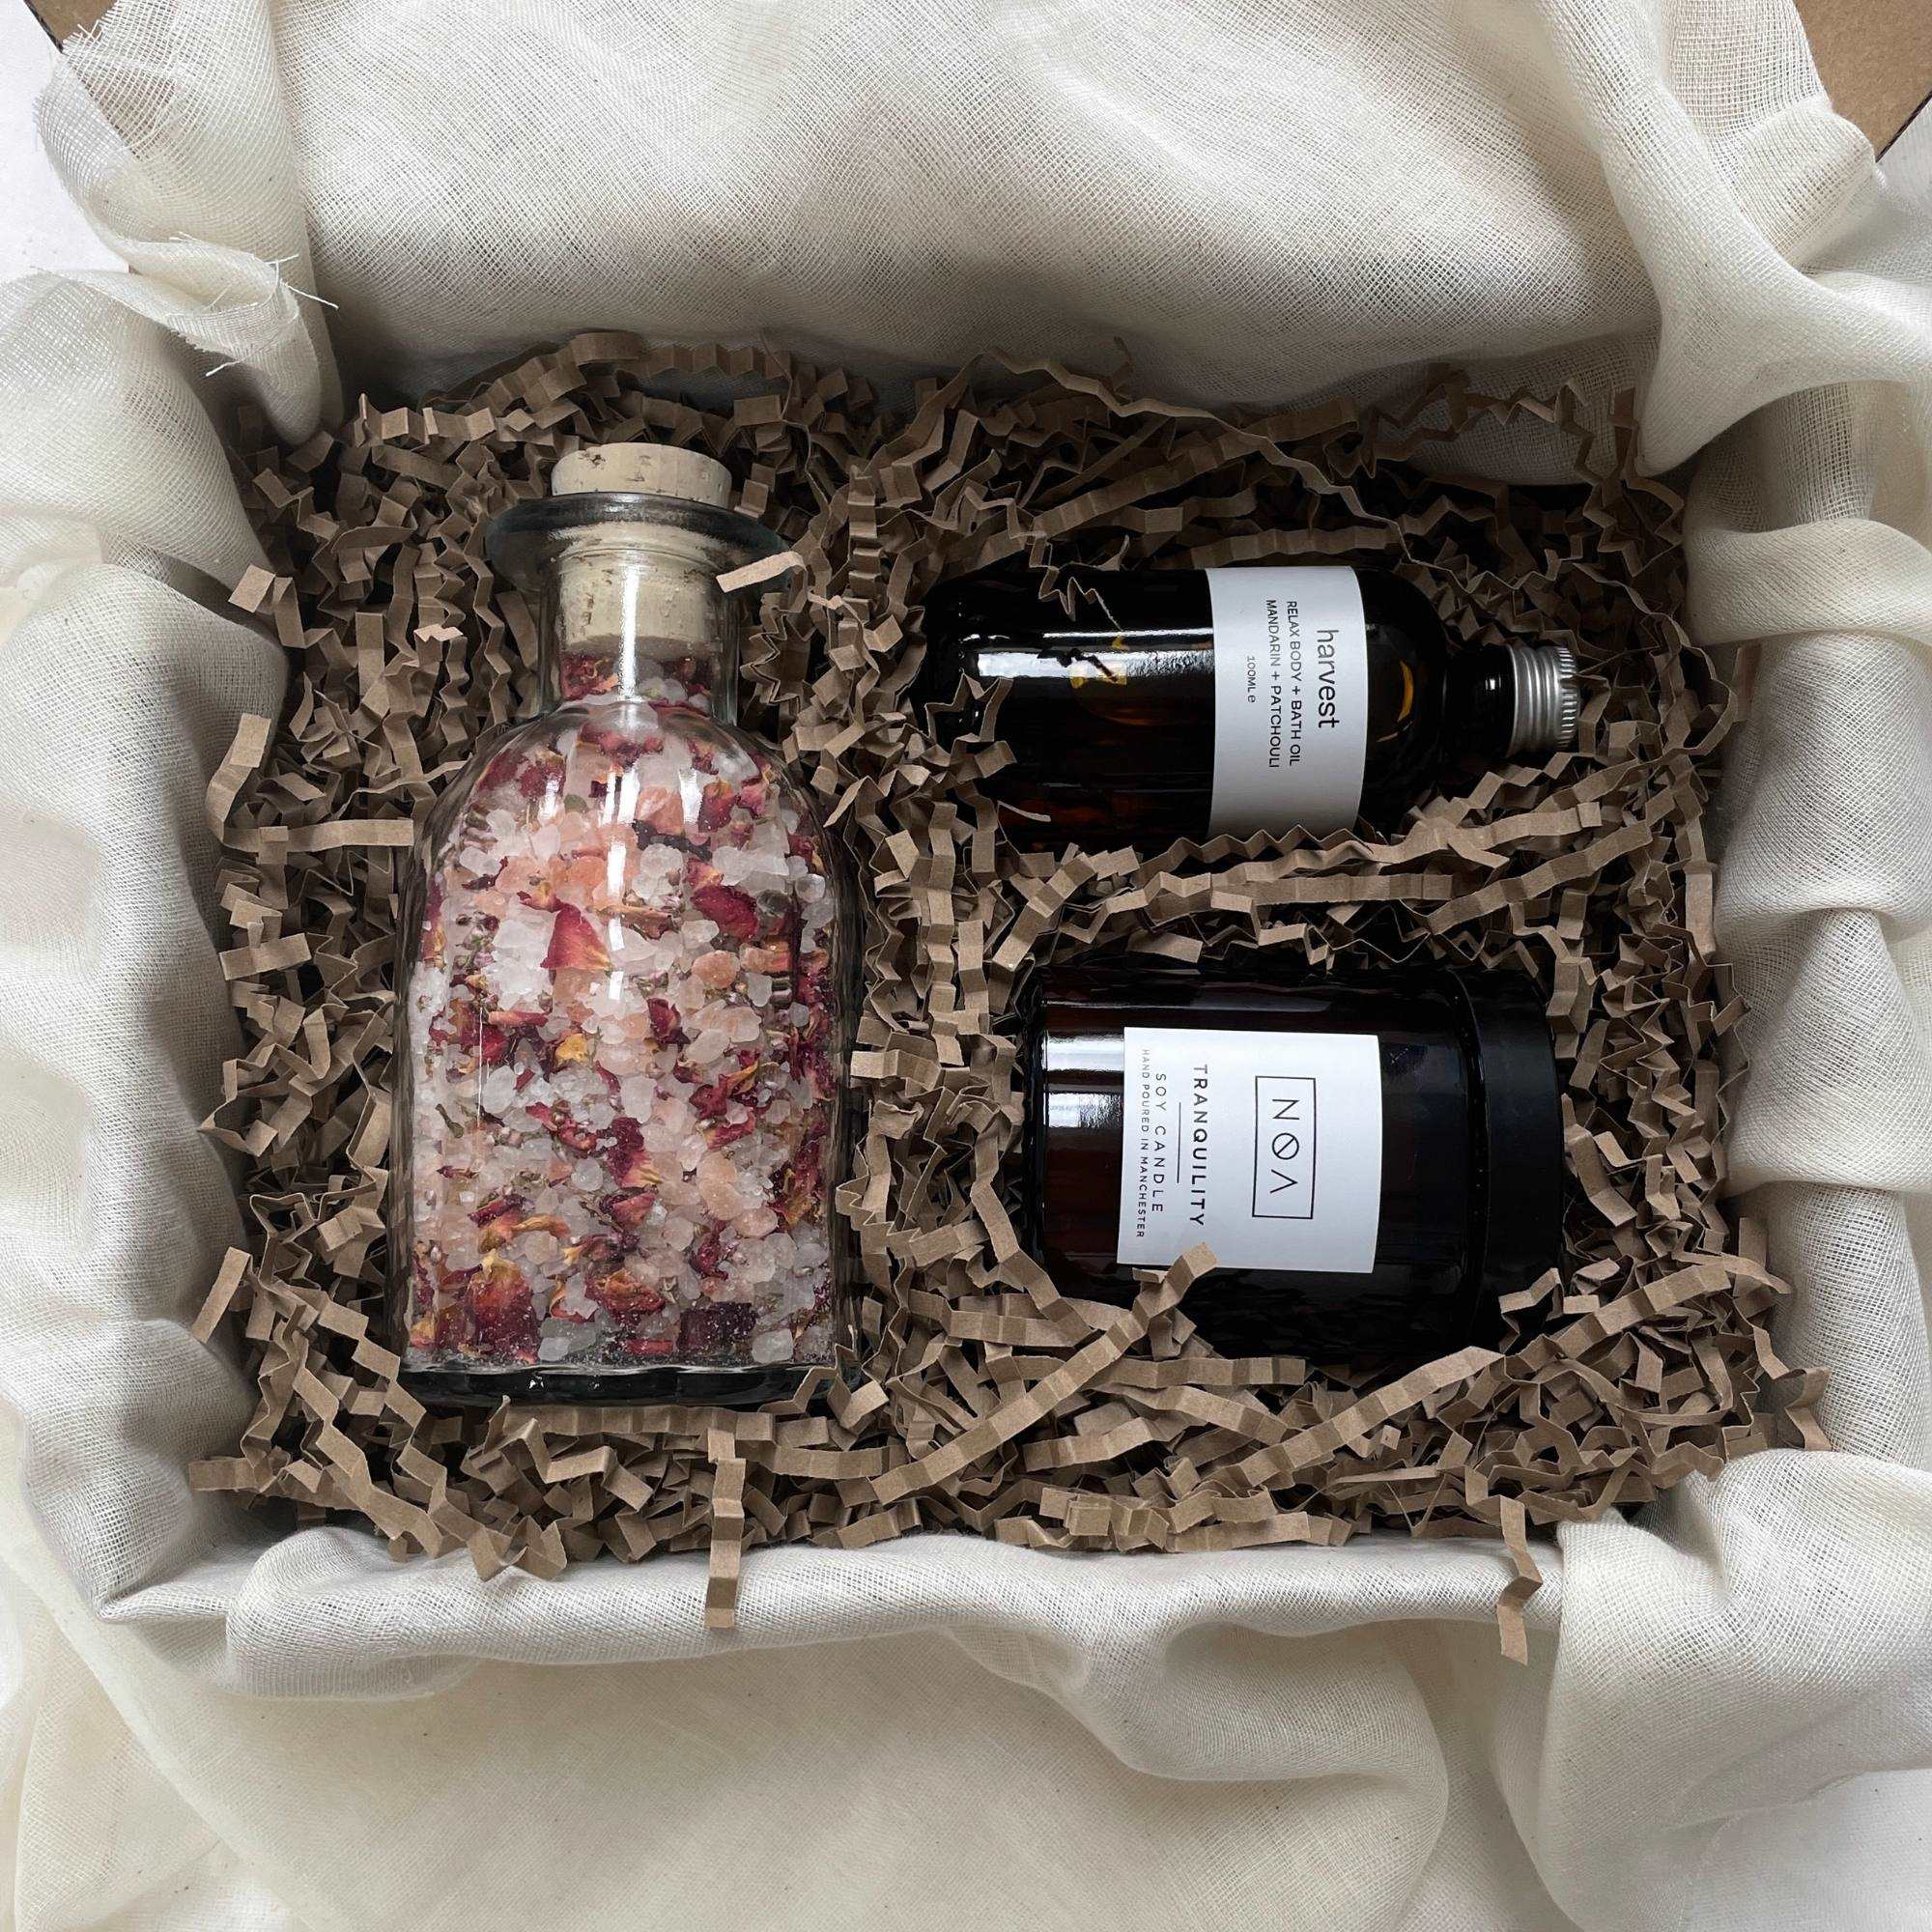 Photo of products inside a cardboard gift box. A clear glass bottle of rose bath salts, an amber glass bottle of body oil and amber glass candle sit on recycled brown paper stuffing on organic muslin fabric.